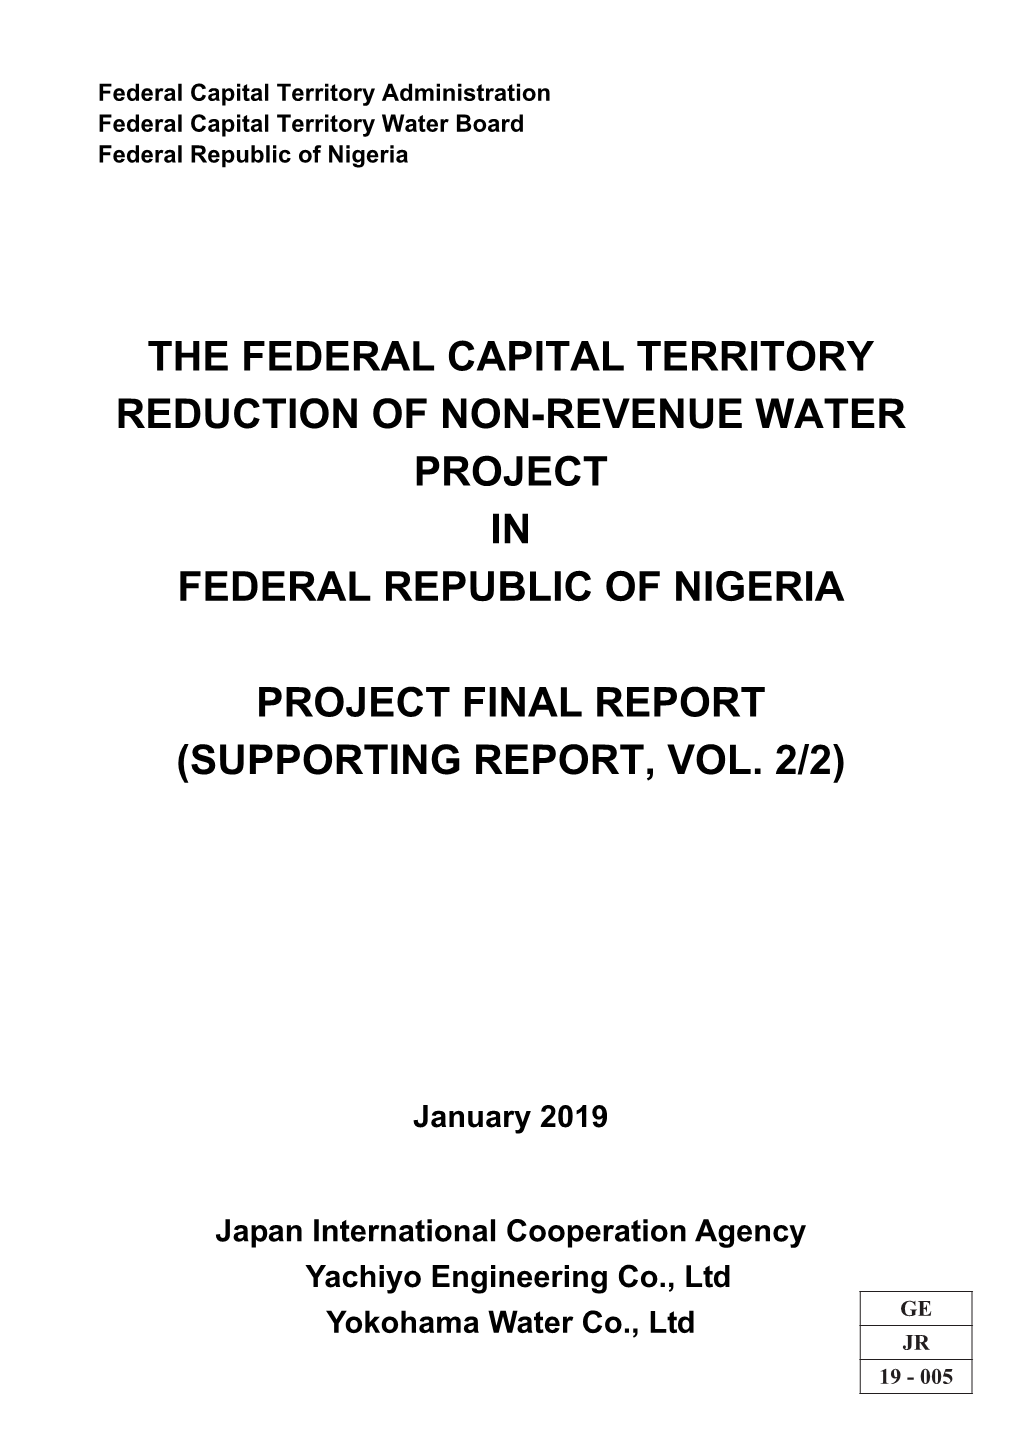 The Federal Capital Territory Reduction of Non-Revenue Water Project